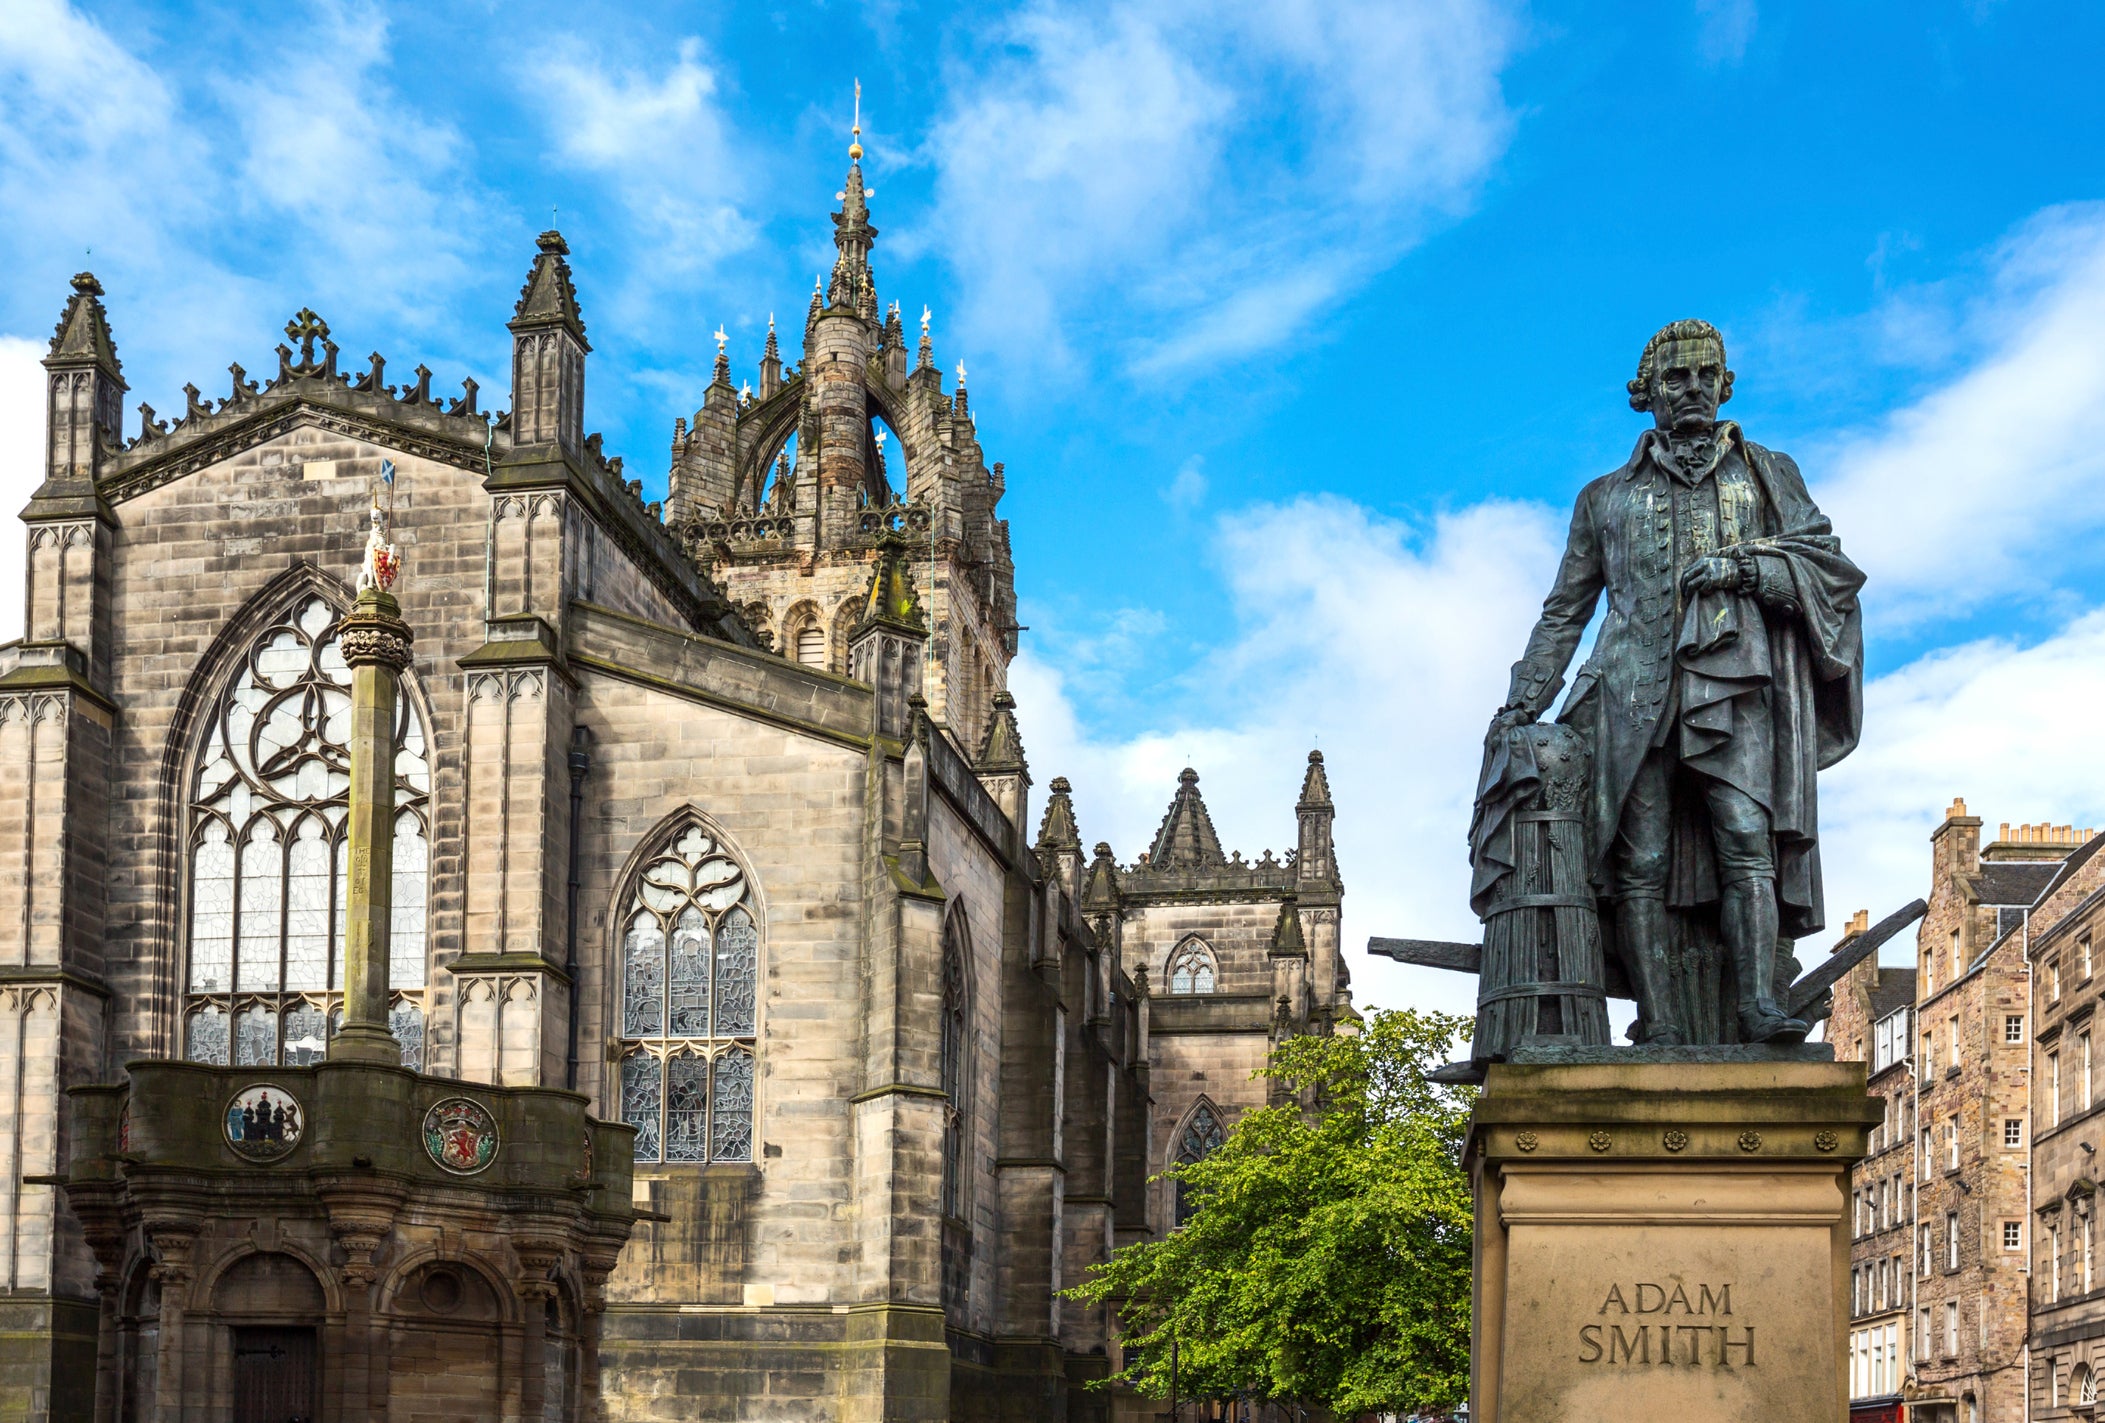 The monument of Adam Smith on the Royal Mile